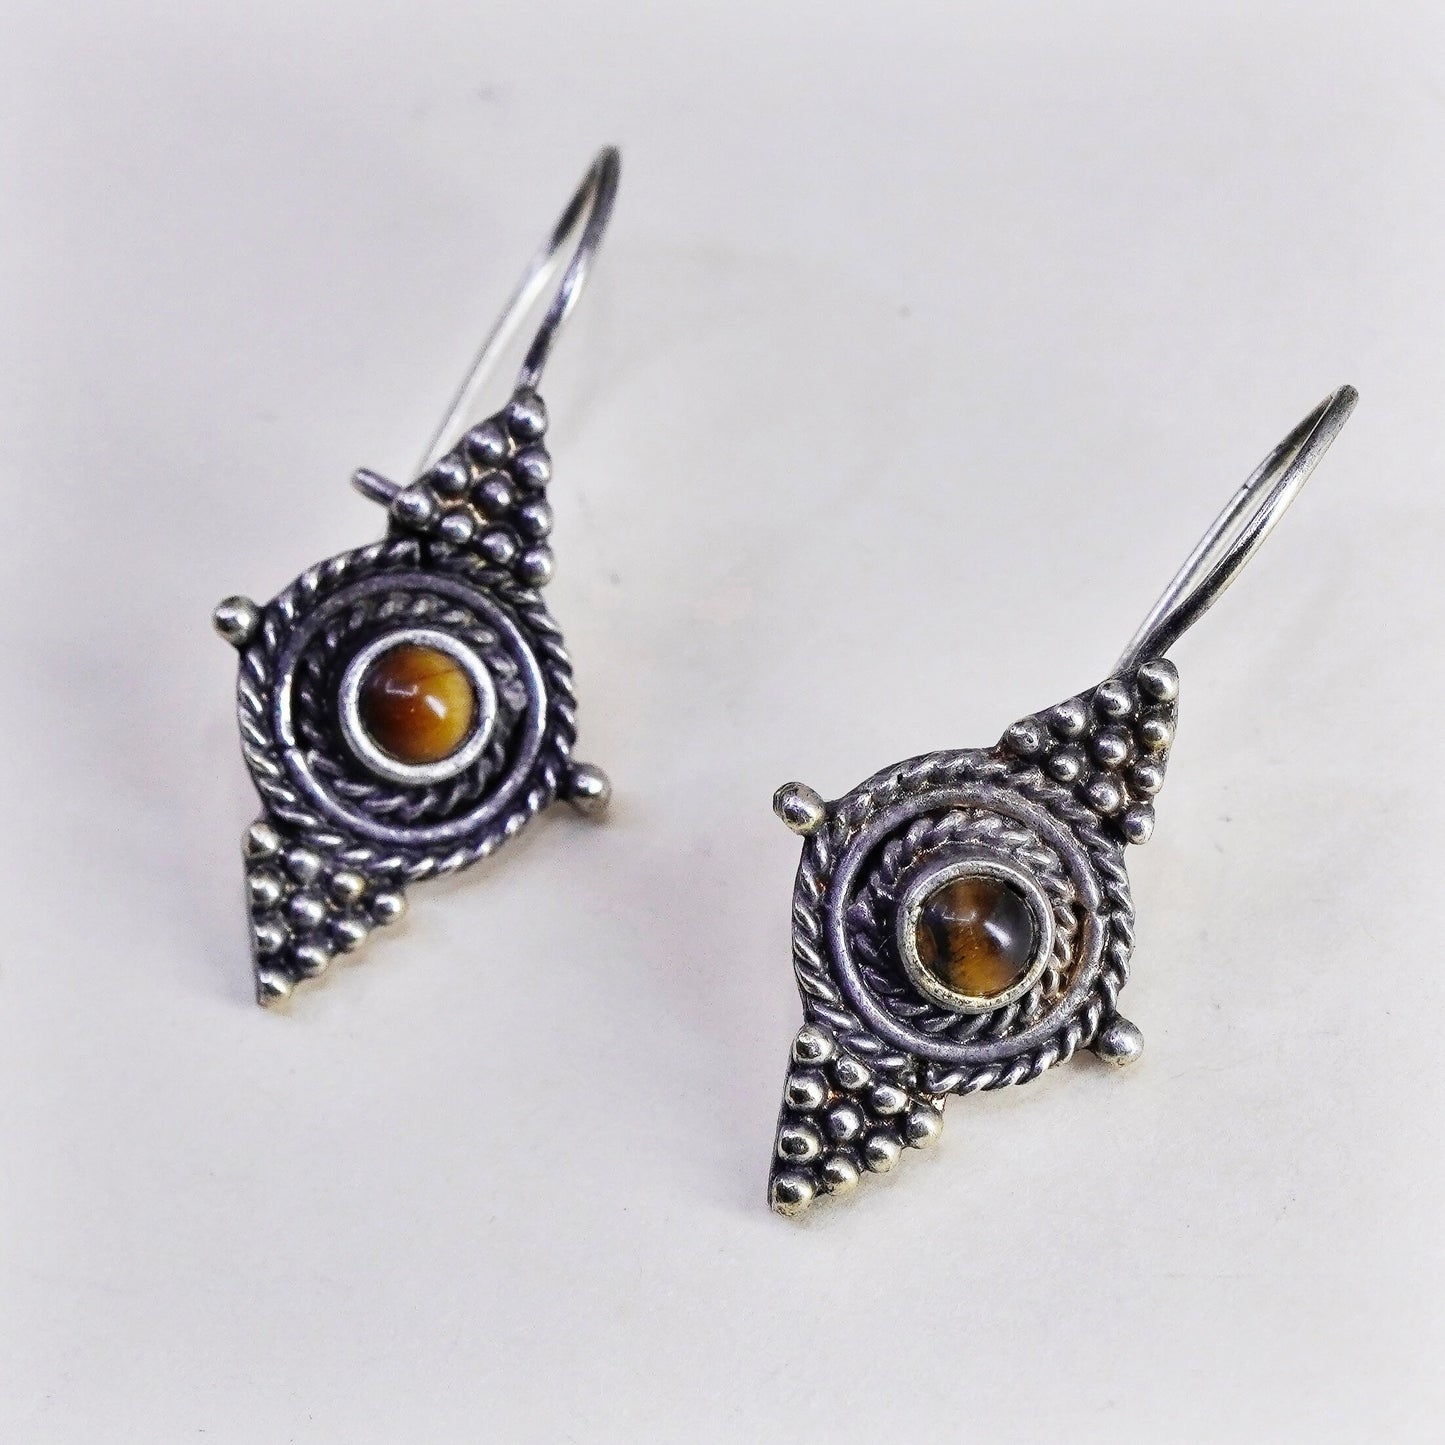 Vintage Sterling silver handmade earrings, 925 with tiger eye and beads